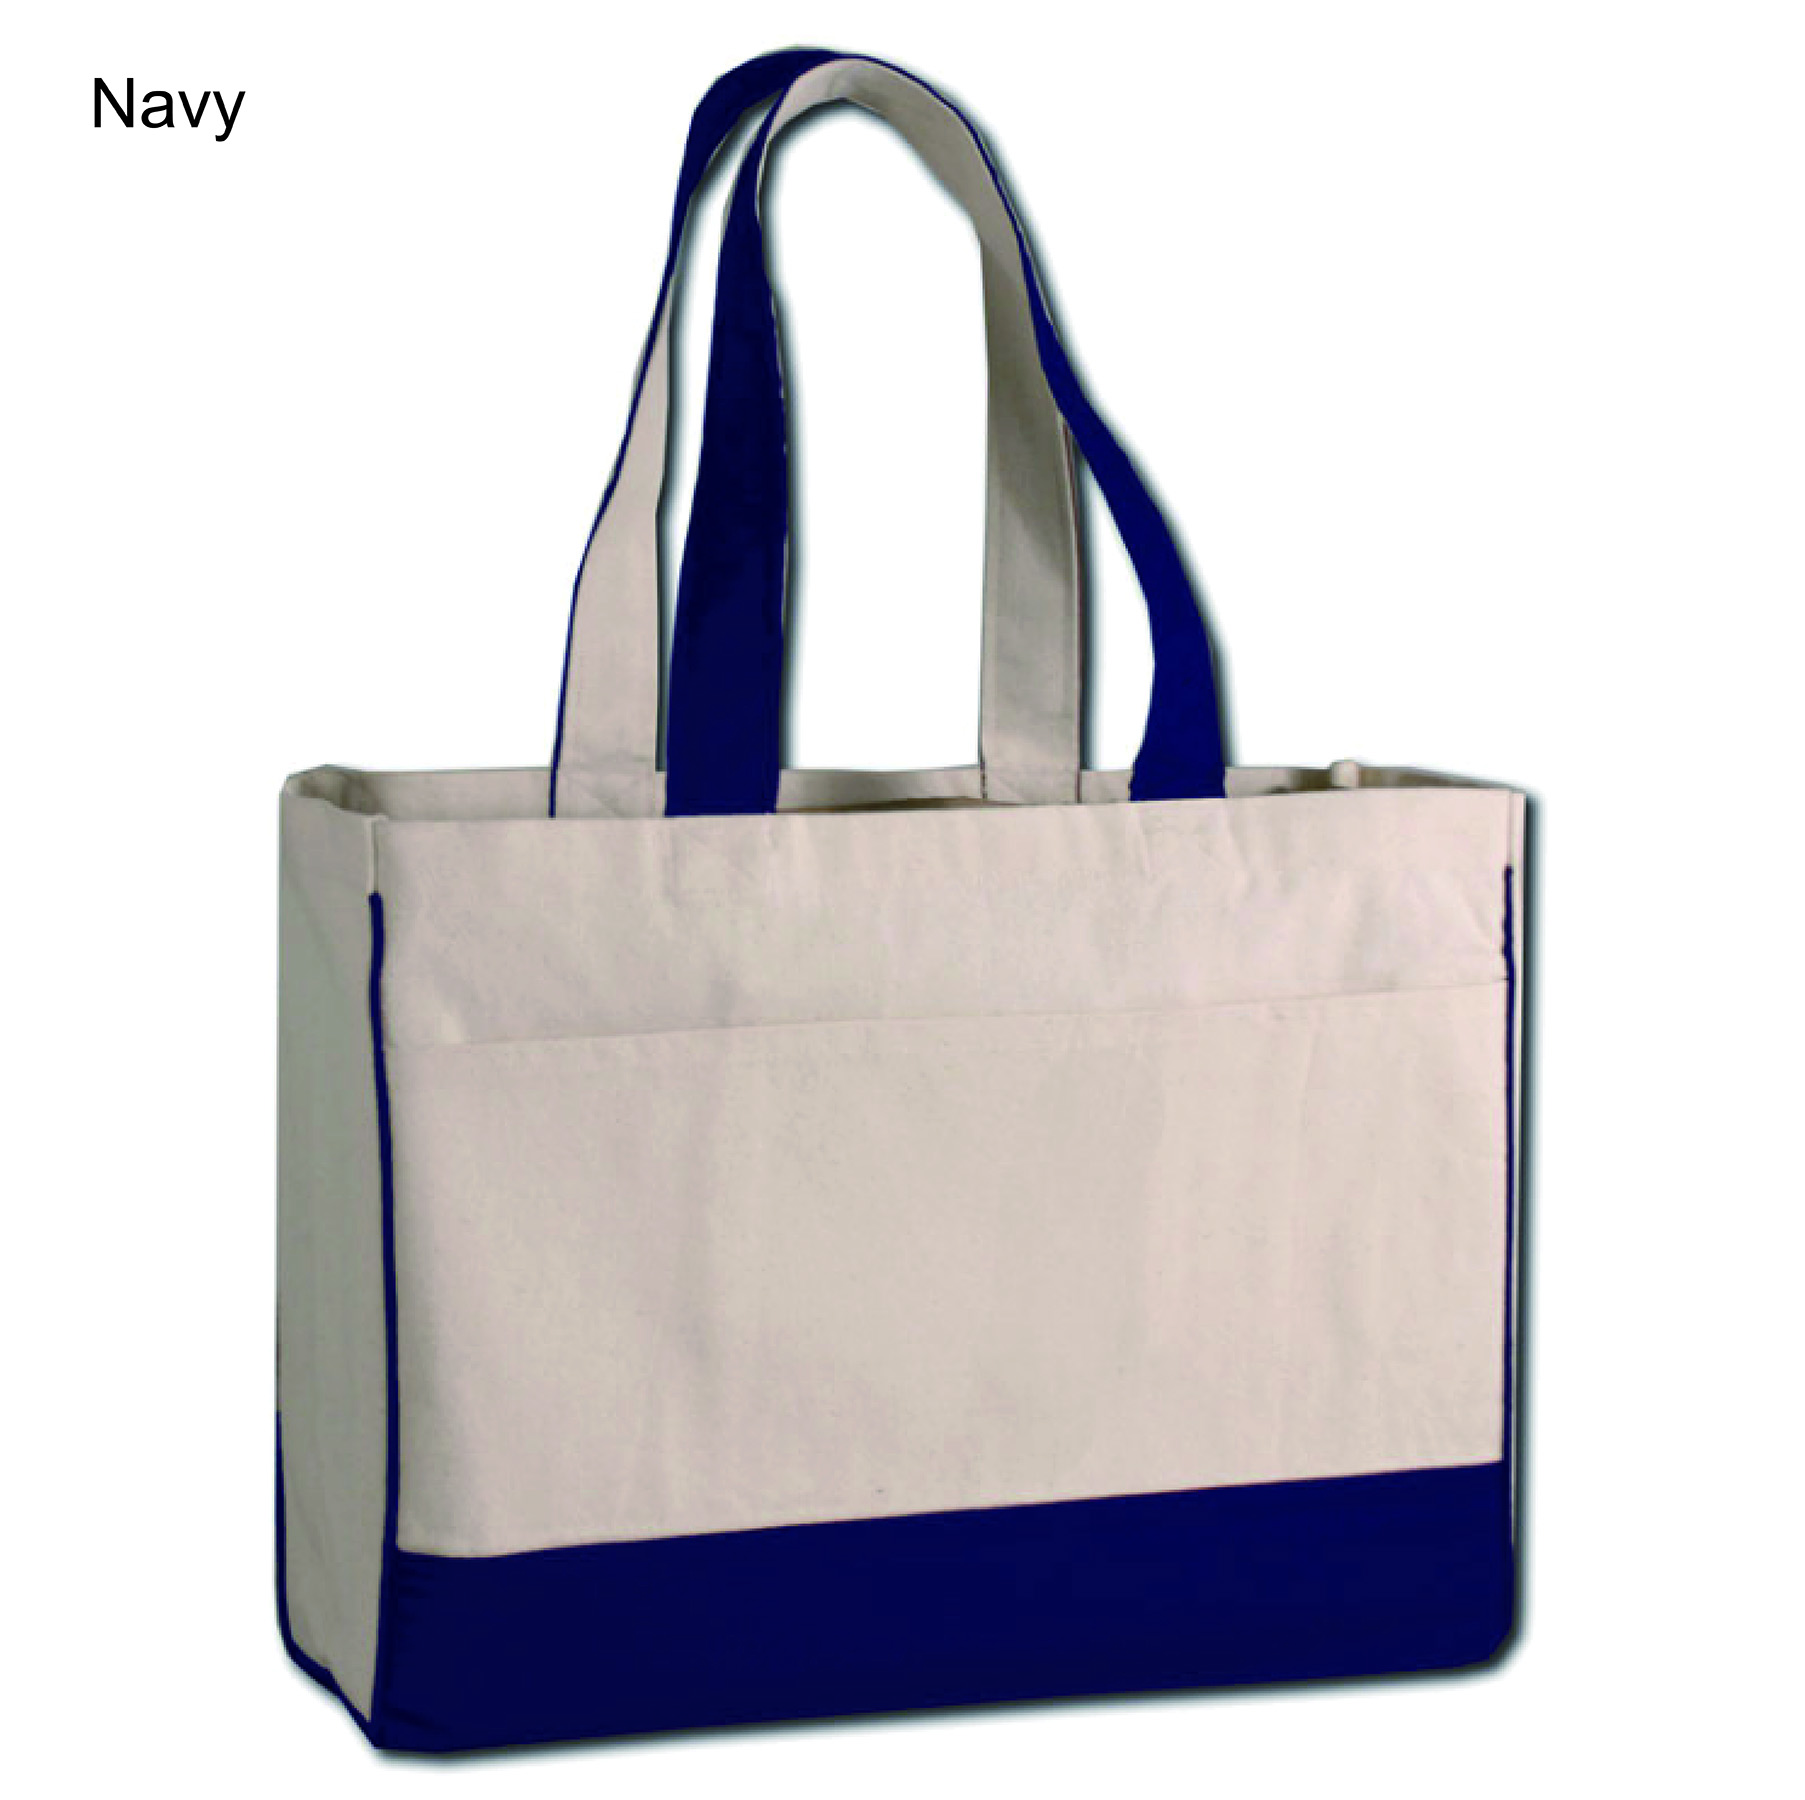 Two-Tone Canvas Tote Bag